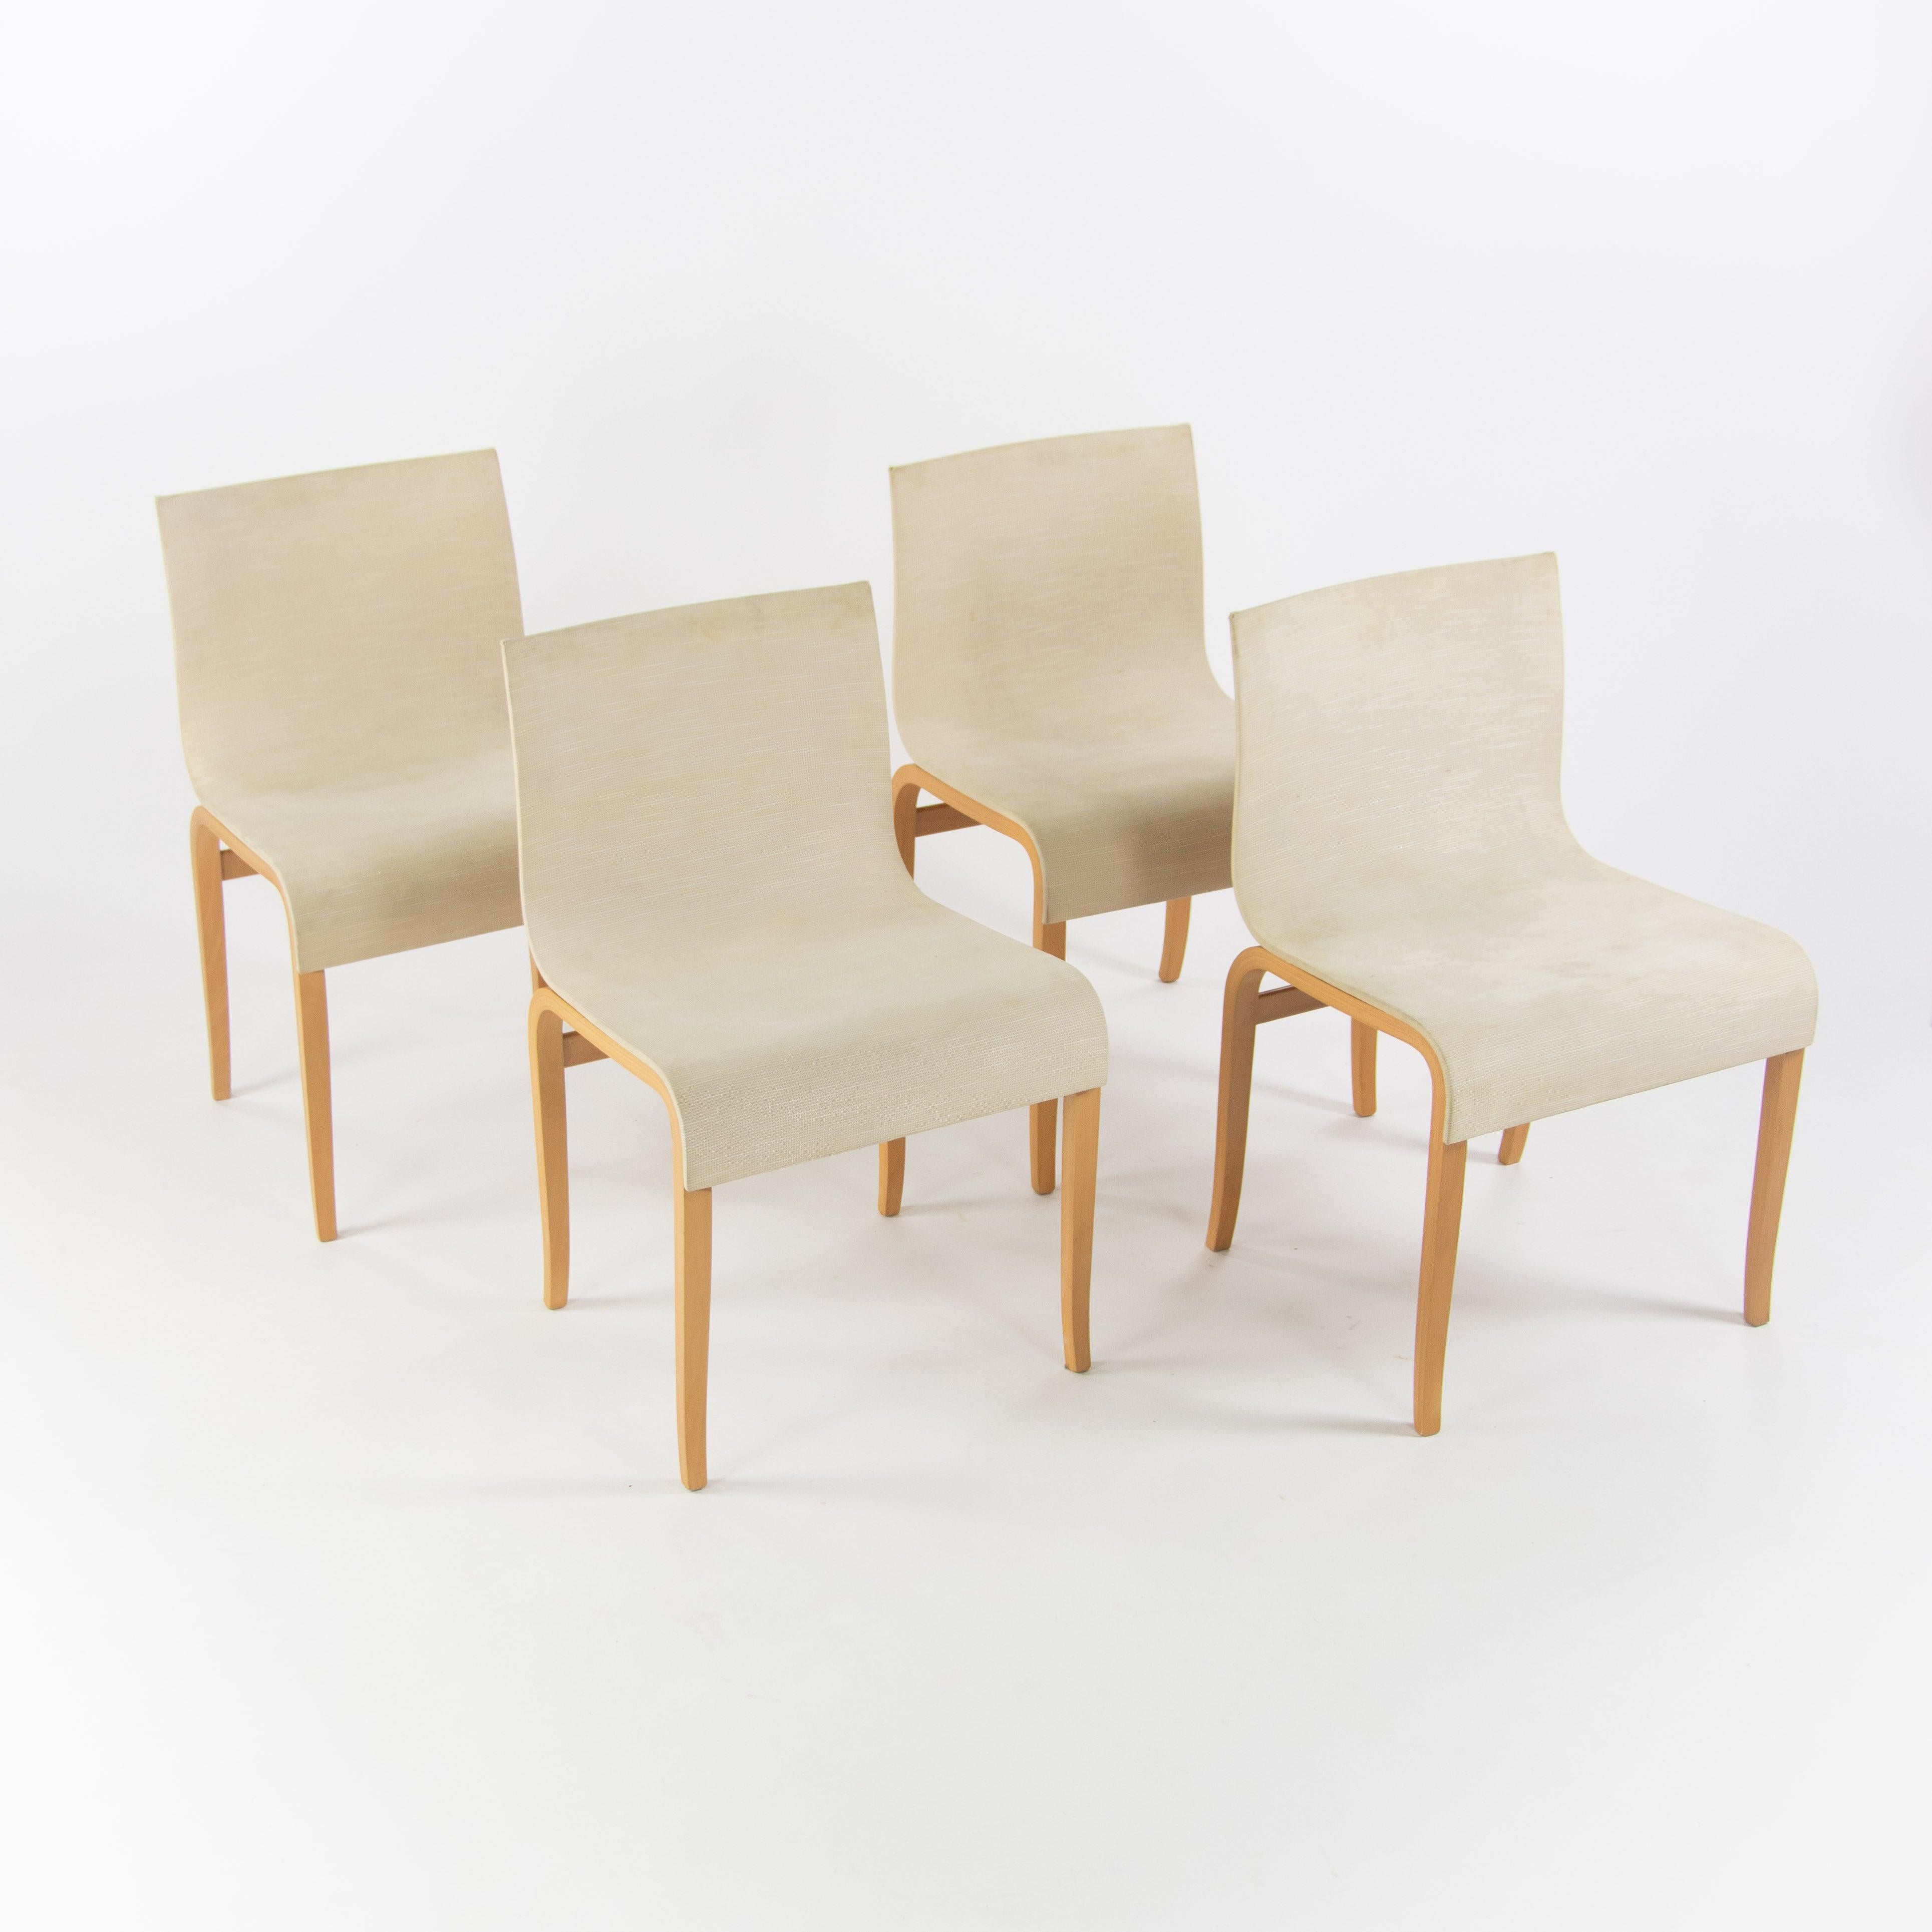 Listed for sale is a set of four gorgeousGina / Ginotta bent plywood dining chairs with oatmeal-color fabric upholstery, produced by Crassevig, distributed by Knoll in the US, and designed by Enrico Franzolini. The chairs are very good vintage